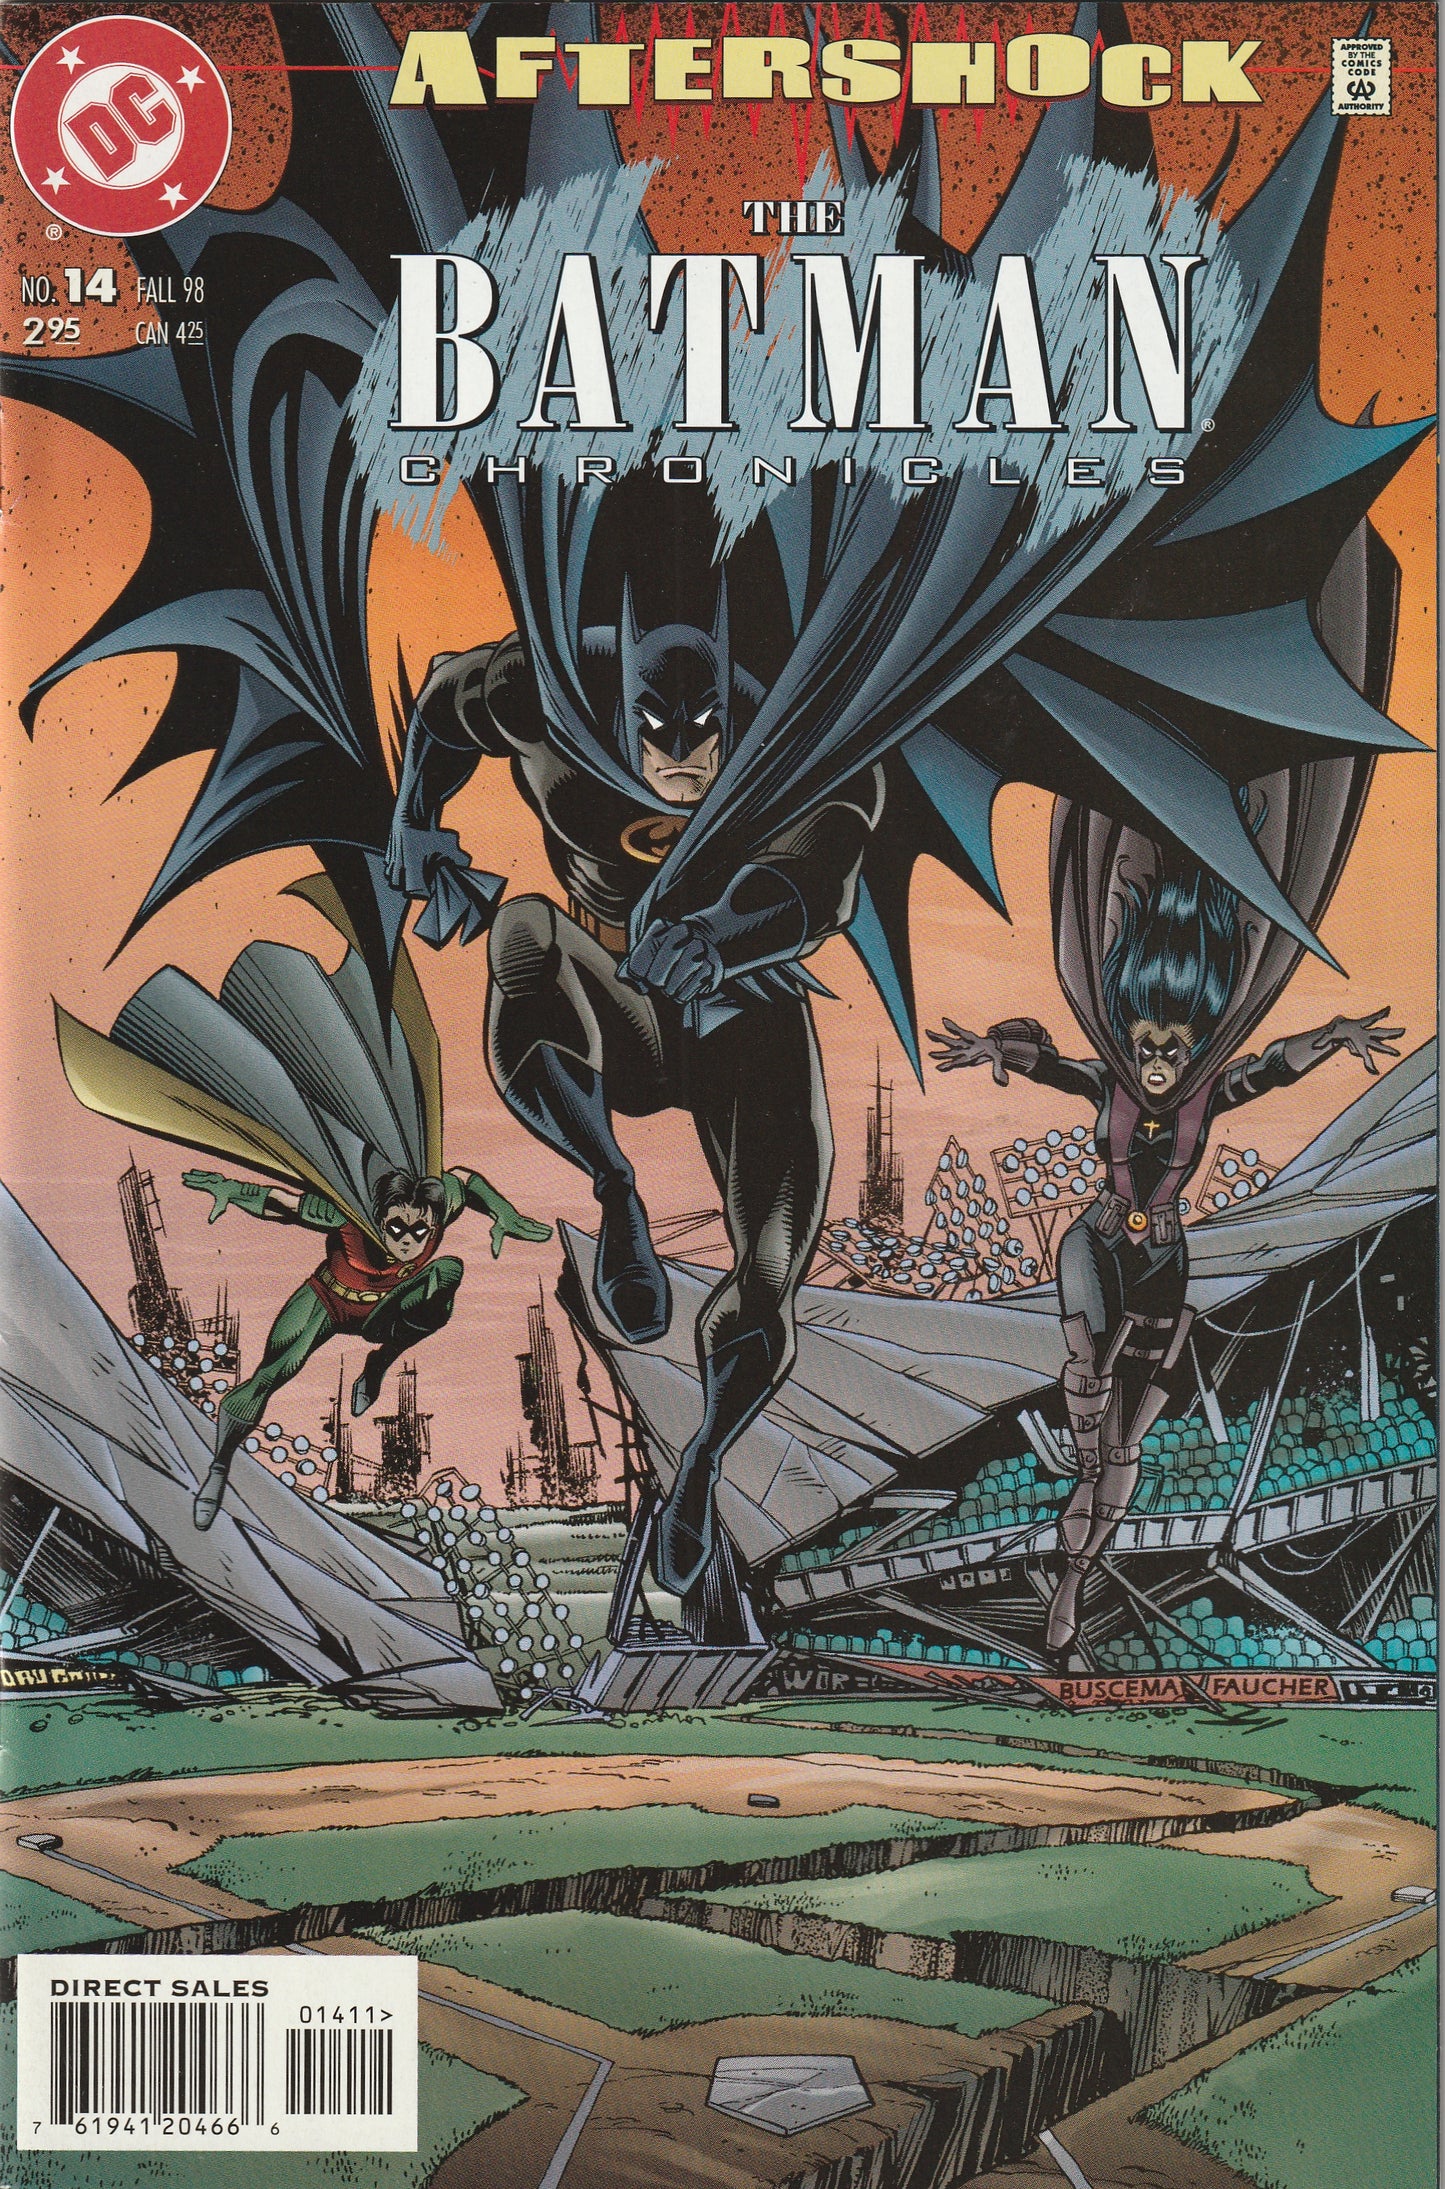 The Batman Chronicles #14 (1998) - Aftershock